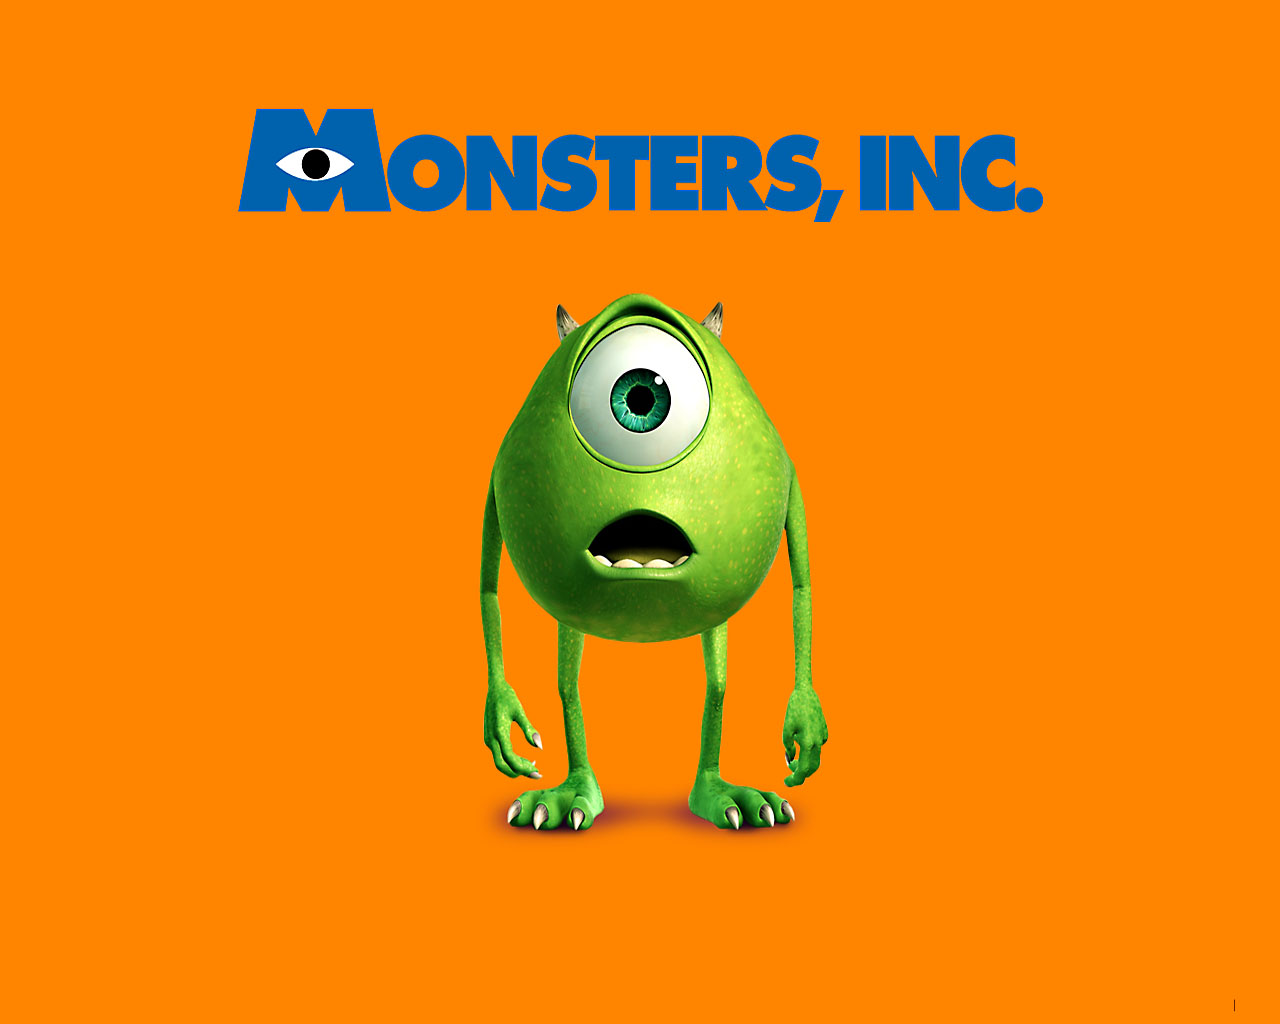 Monsters Inc Wallpaper for PC Full HD Pictures